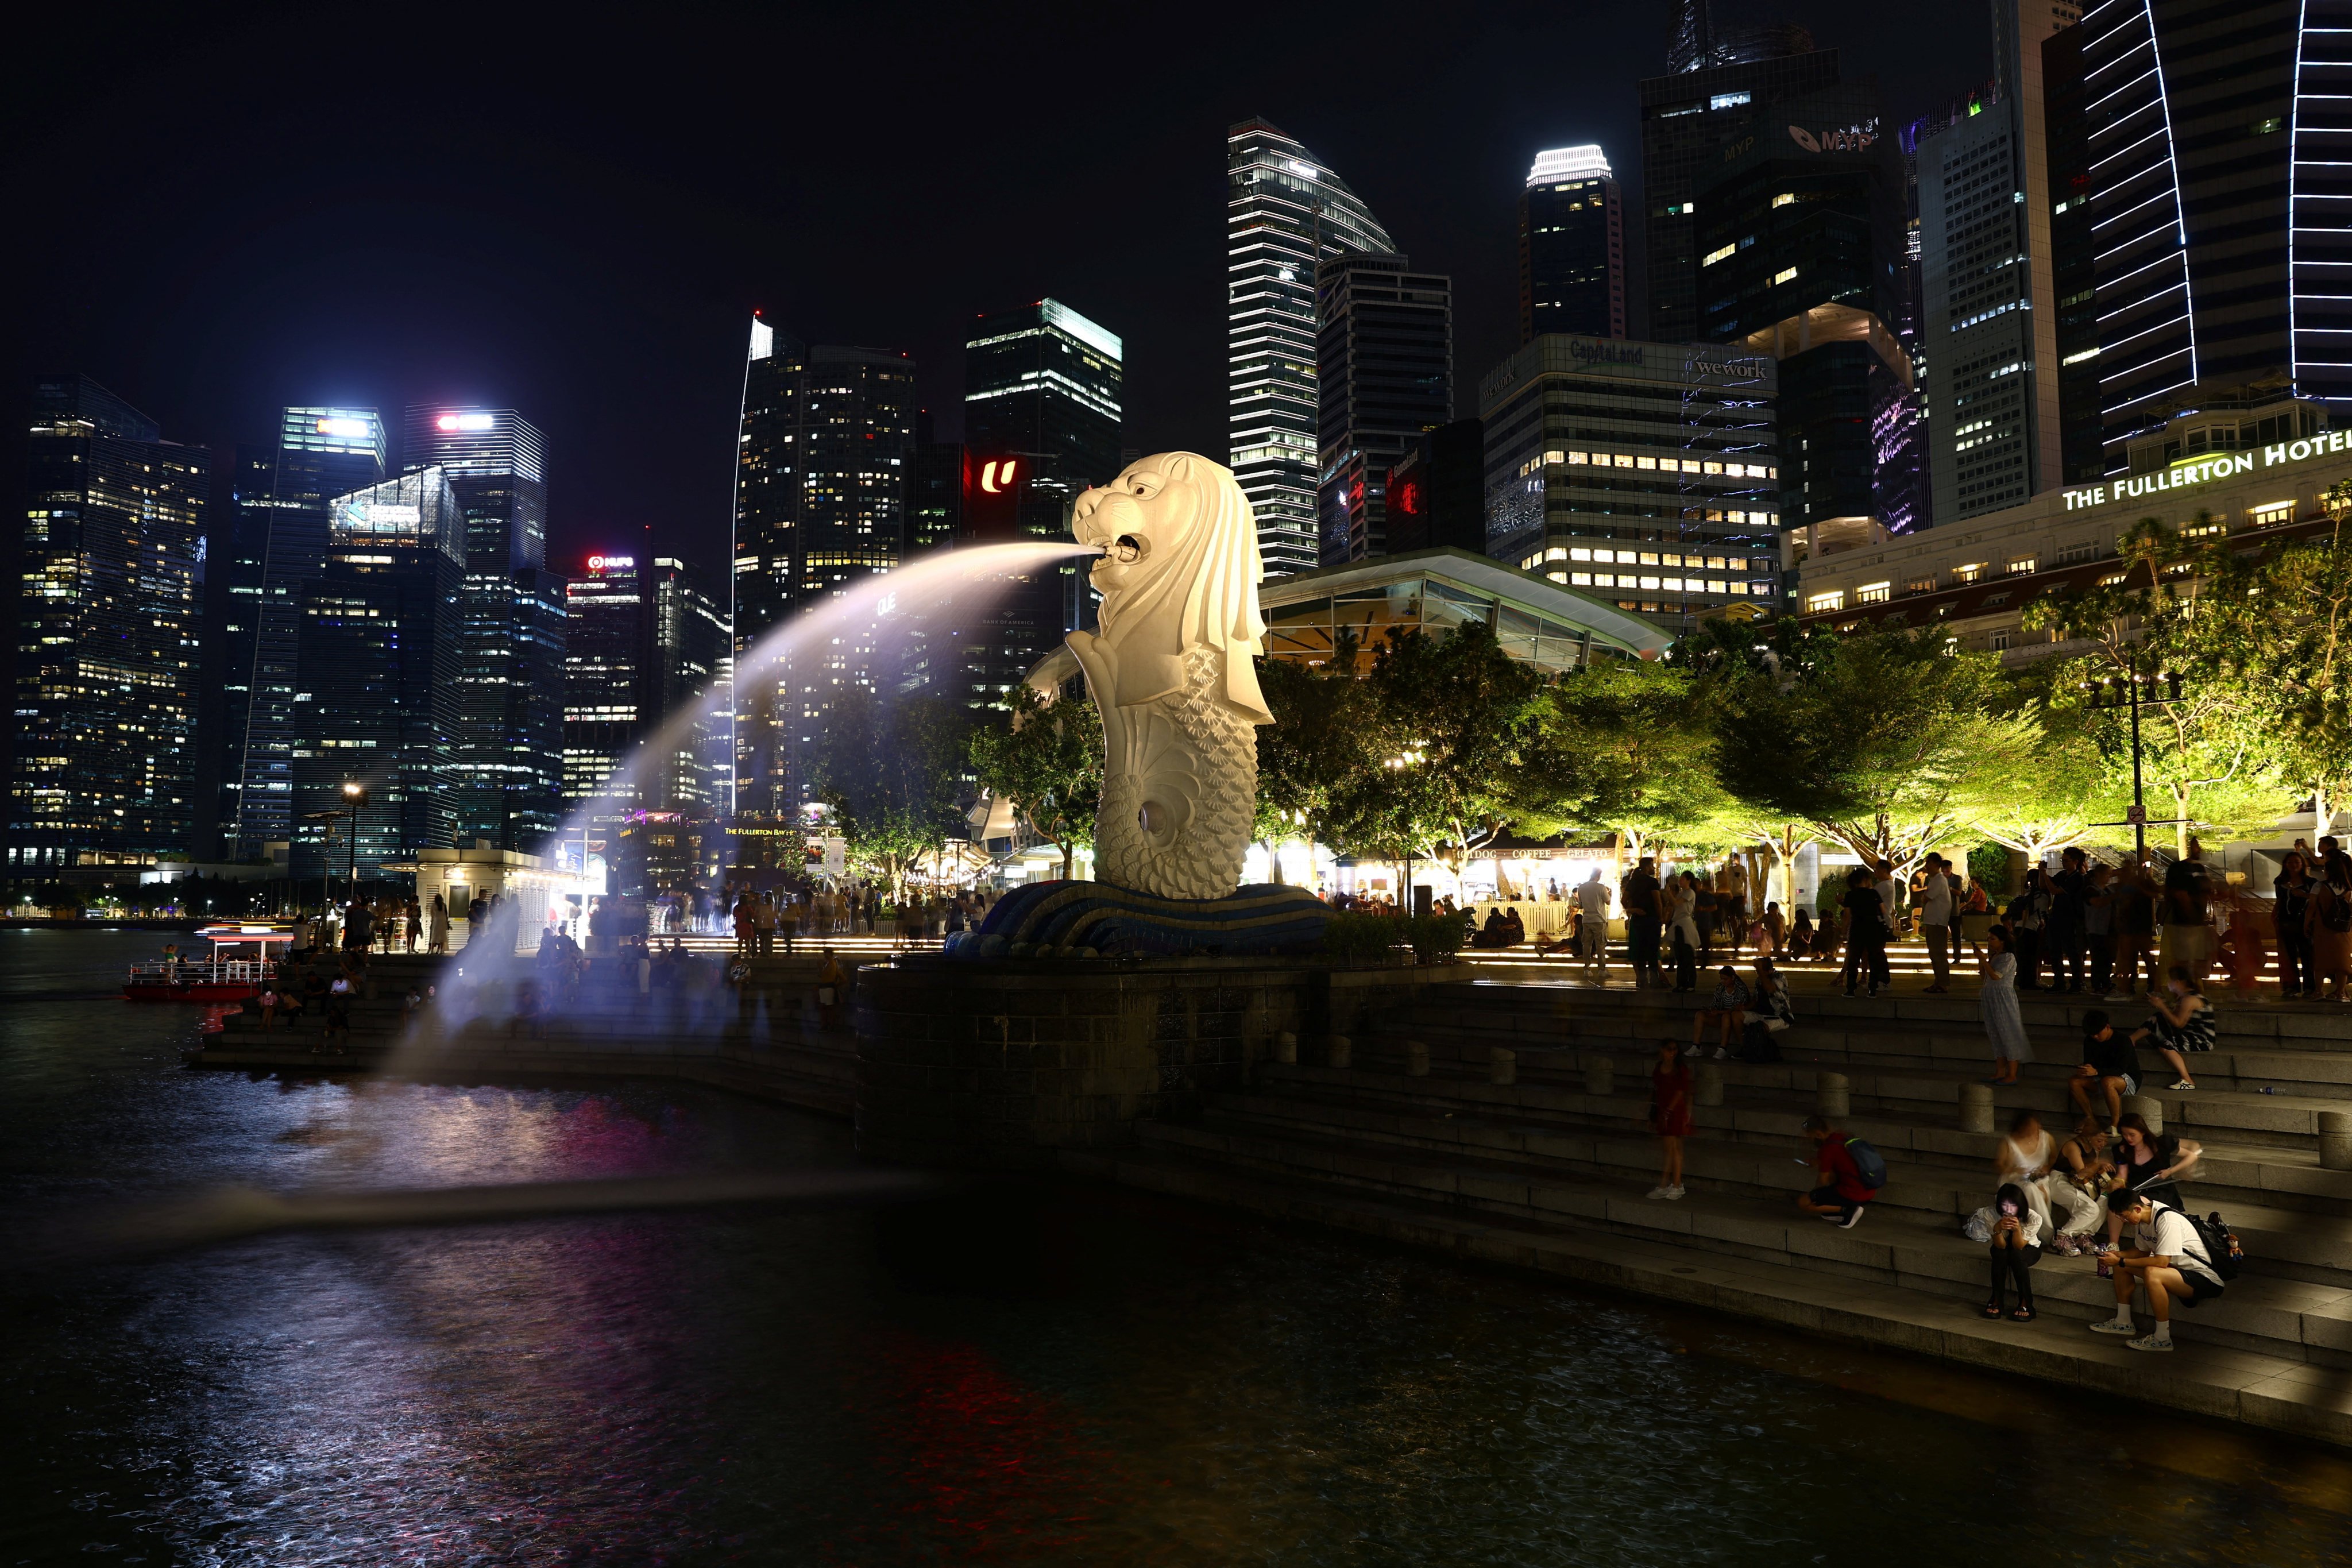 Singapore’s Merlion Park. The judge in the case outlined the need for deterrence to protect Singapore’s reputation as a financial hub. Photo: Reuters